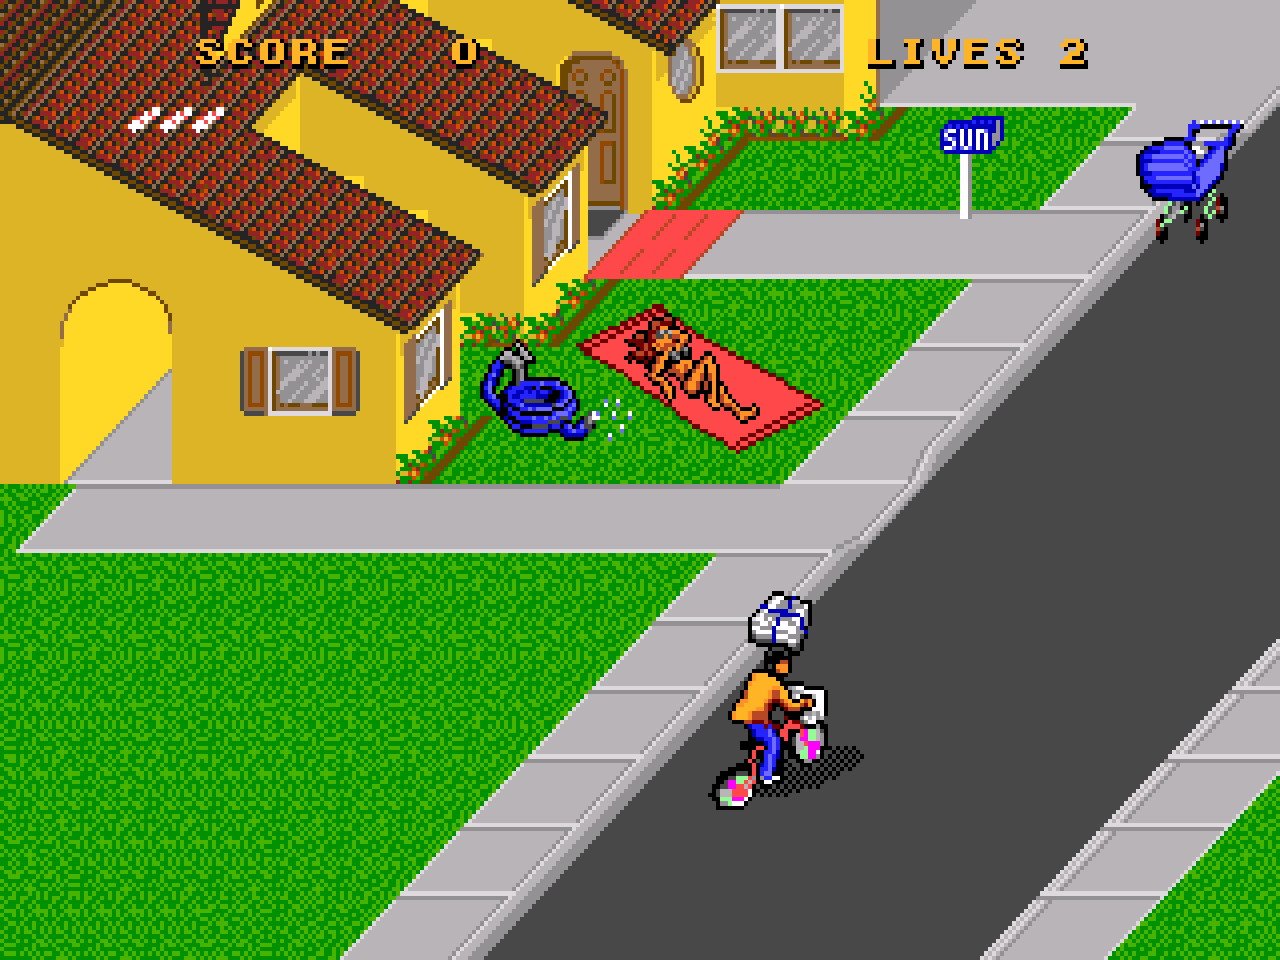 Paperboy was such a fun game and deceptively challenging as well.